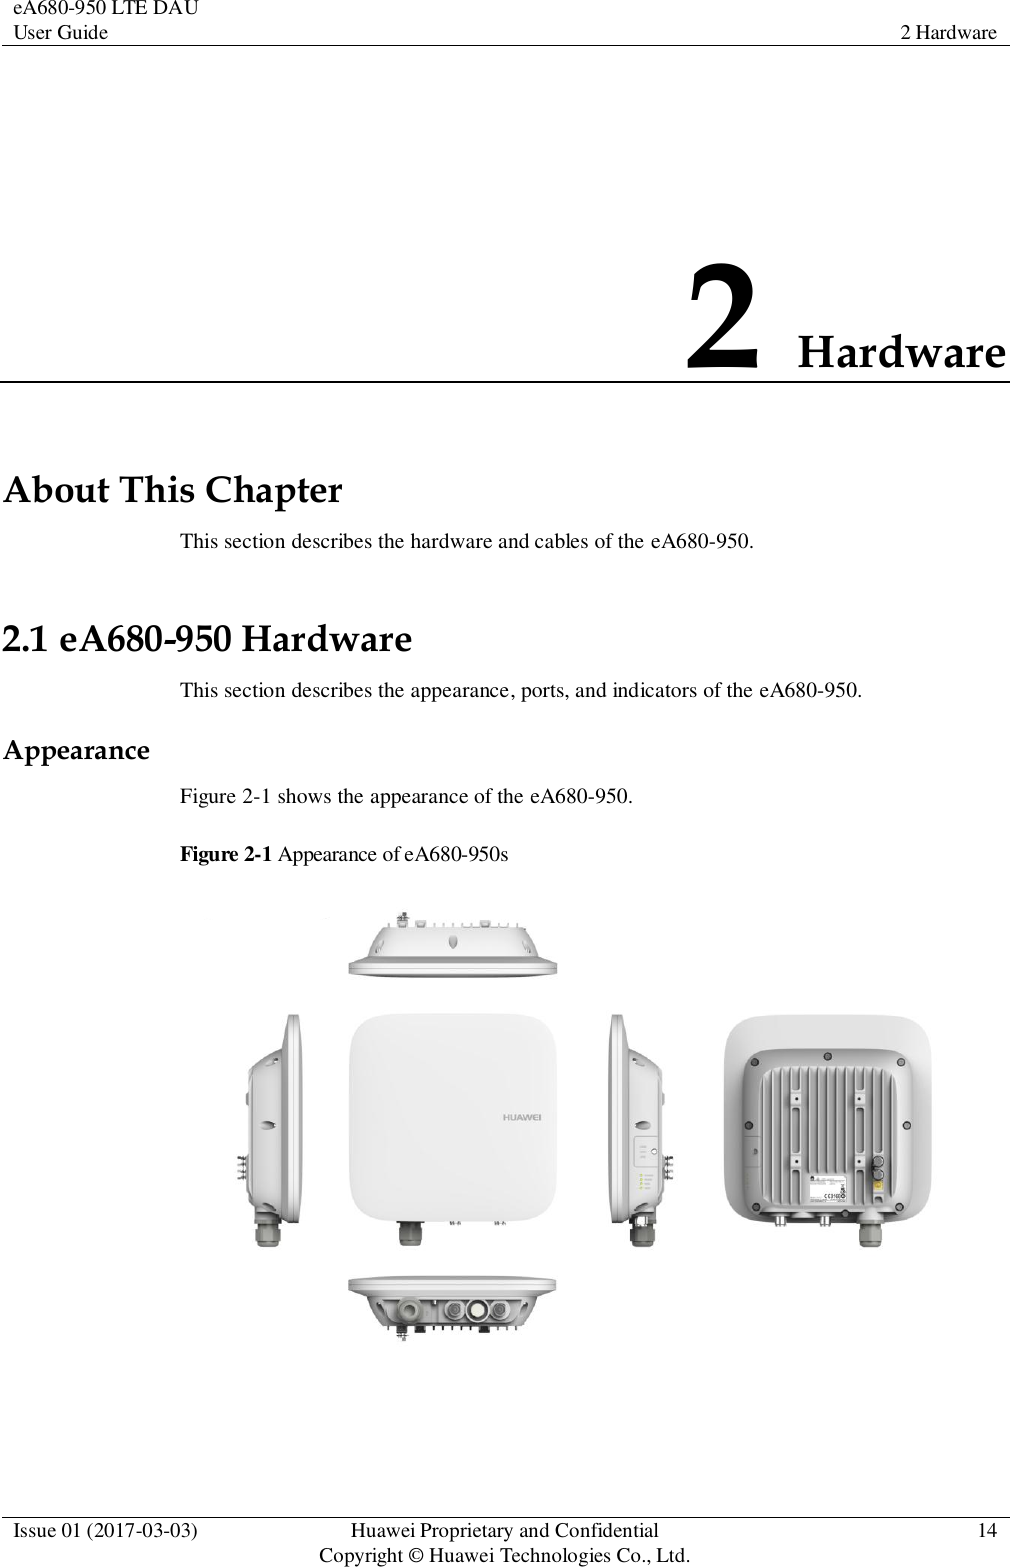 eA680-950 LTE DAU User Guide 2 Hardware  Issue 01 (2017-03-03) Huawei Proprietary and Confidential                                     Copyright © Huawei Technologies Co., Ltd. 14  2 Hardware About This Chapter This section describes the hardware and cables of the eA680-950. 2.1 eA680-950 Hardware This section describes the appearance, ports, and indicators of the eA680-950. Appearance Figure 2-1 shows the appearance of the eA680-950. Figure 2-1 Appearance of eA680-950s    